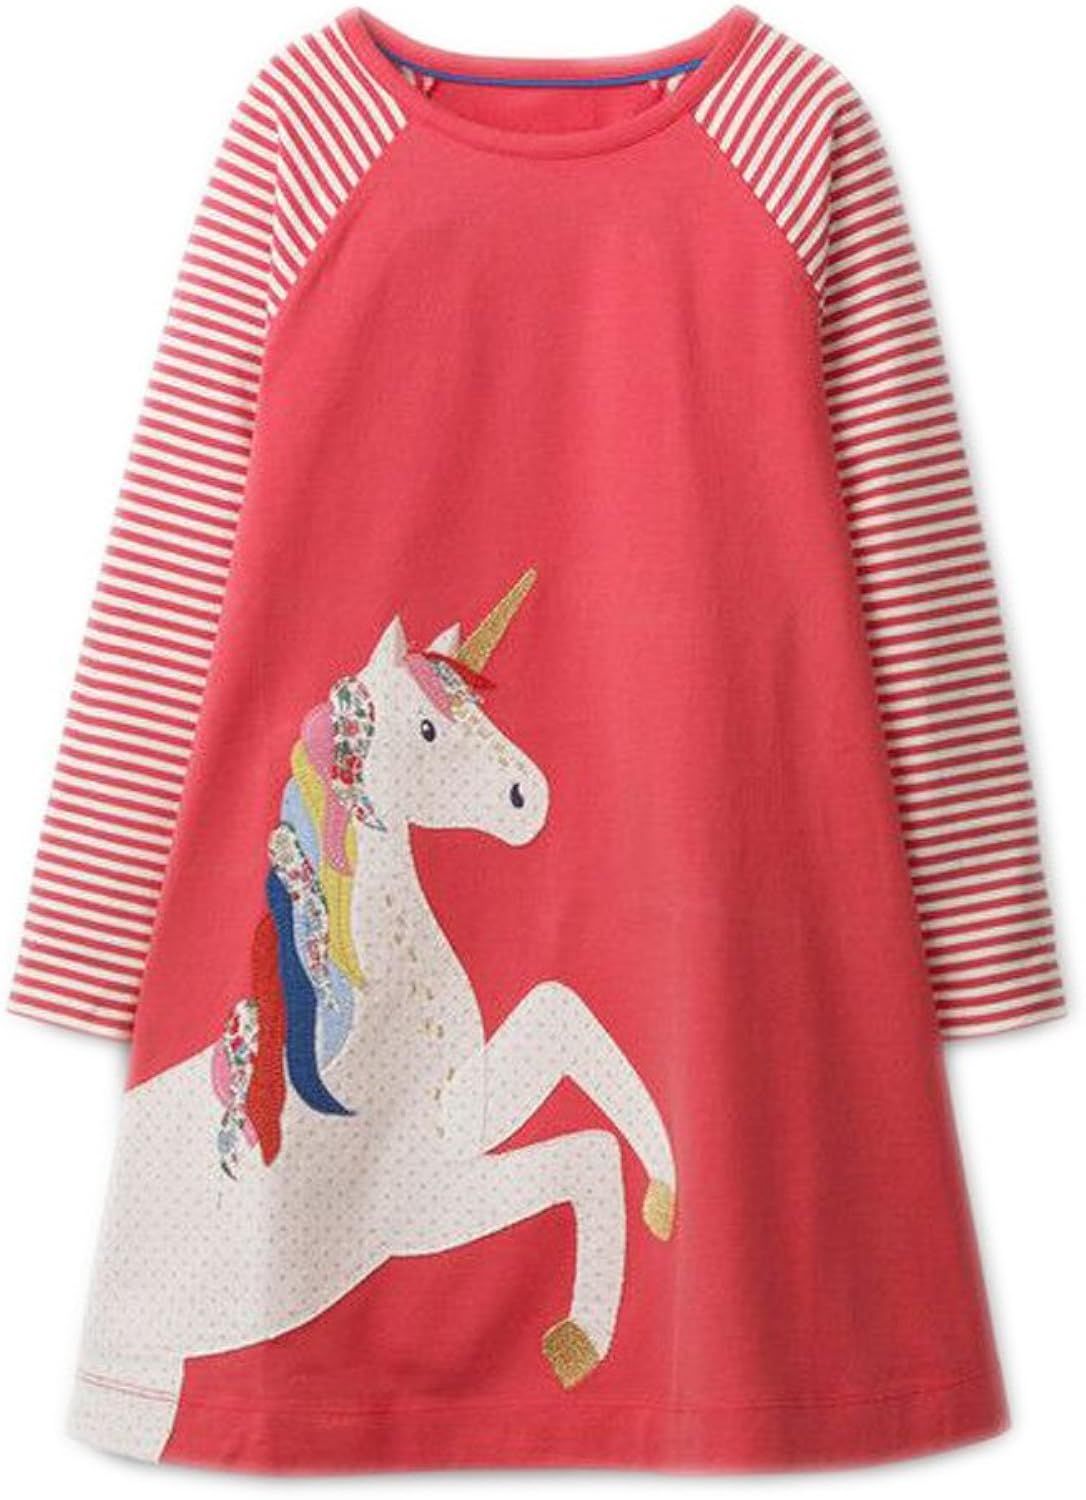 Youlebao Girls Cotton Long Sleeve Casual Cartoon Appliques Striped Jersey Dresses | Amazon (US)